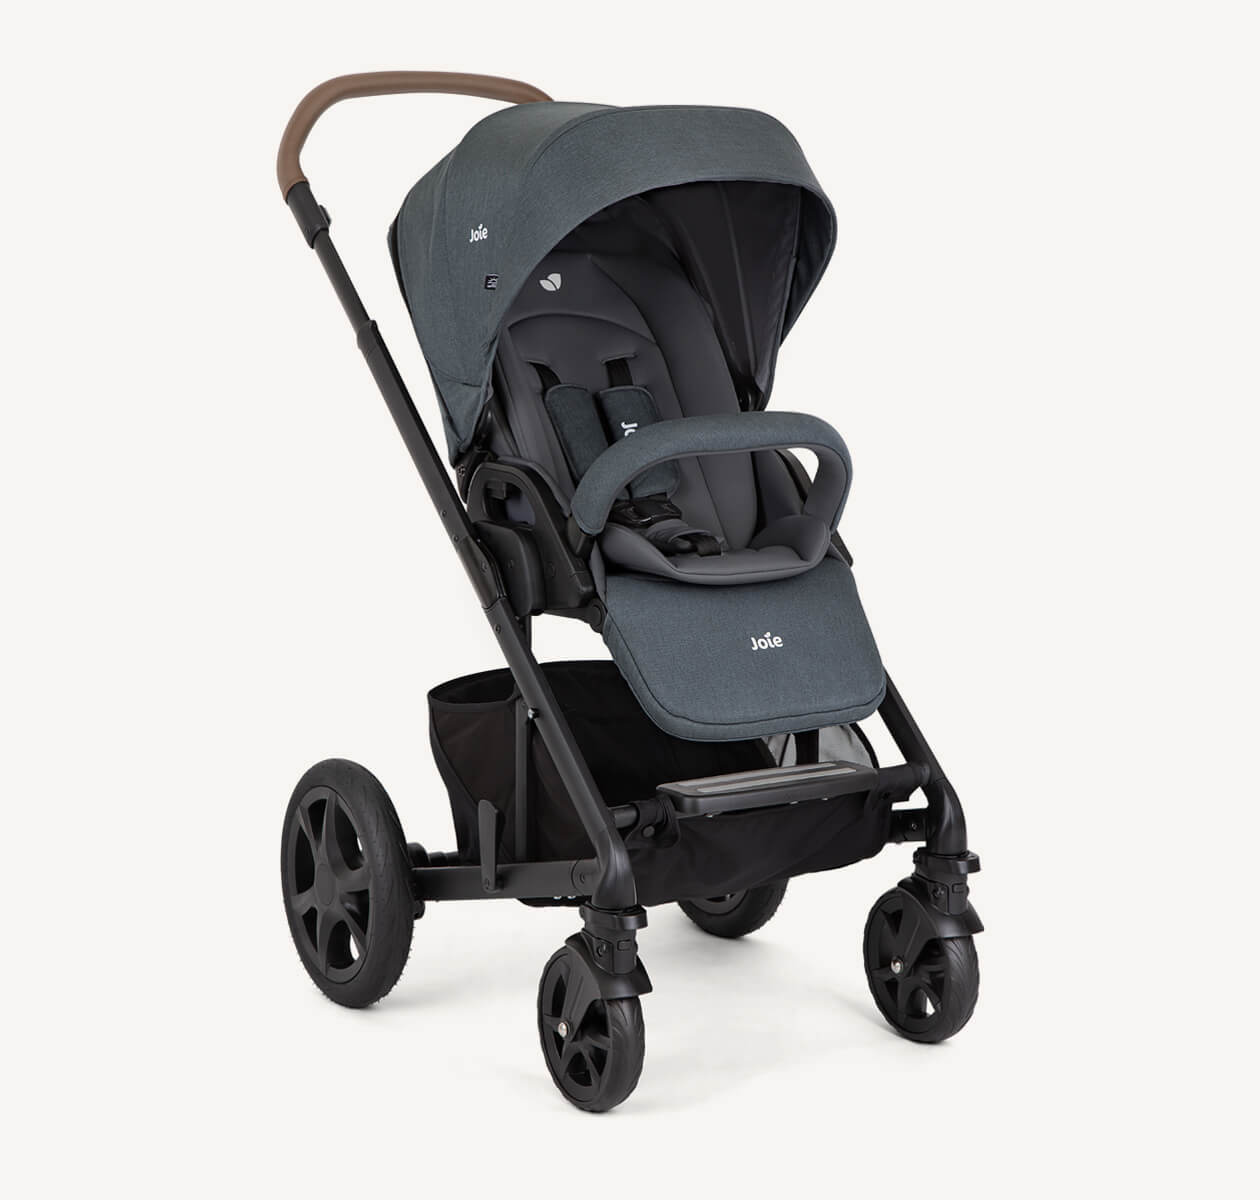 The Joie Chrome DLX pram in blue at an angle facing to the right.